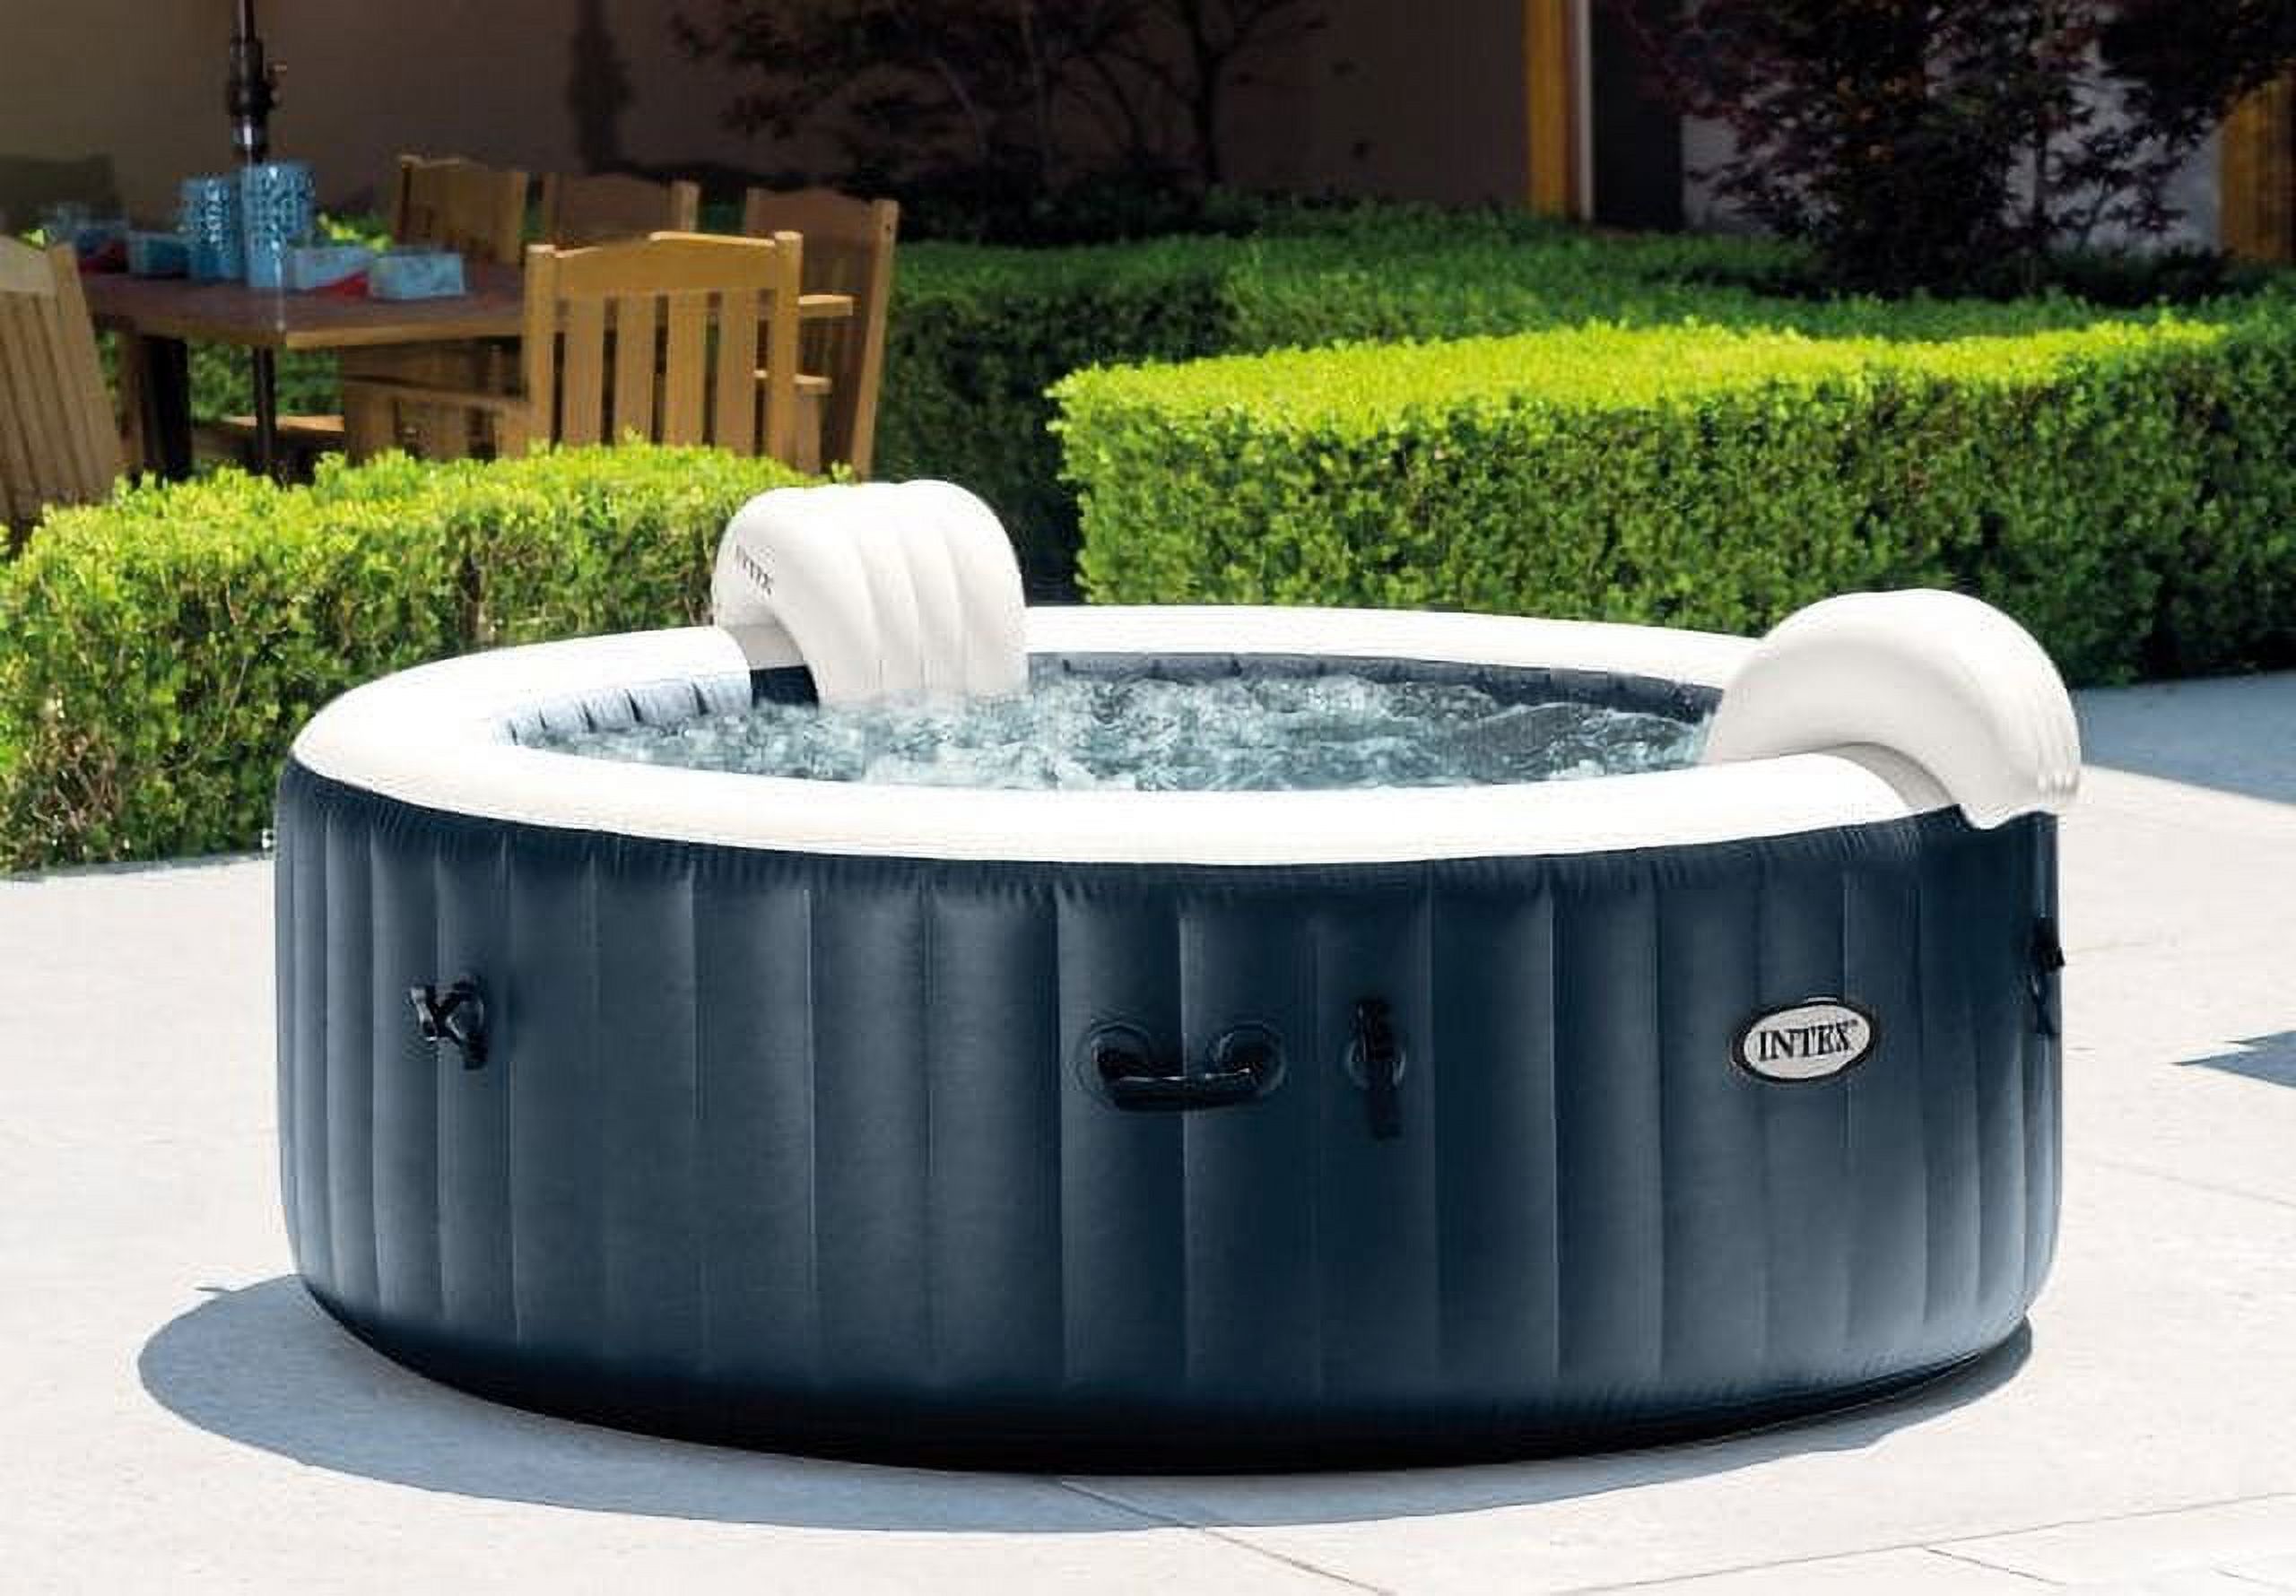 INTEX PureSpa™ Plus Bubble Inflatable Hot Tub Set - 4 Person Spa with Energy Efficient Spa Cover - image 1 of 16